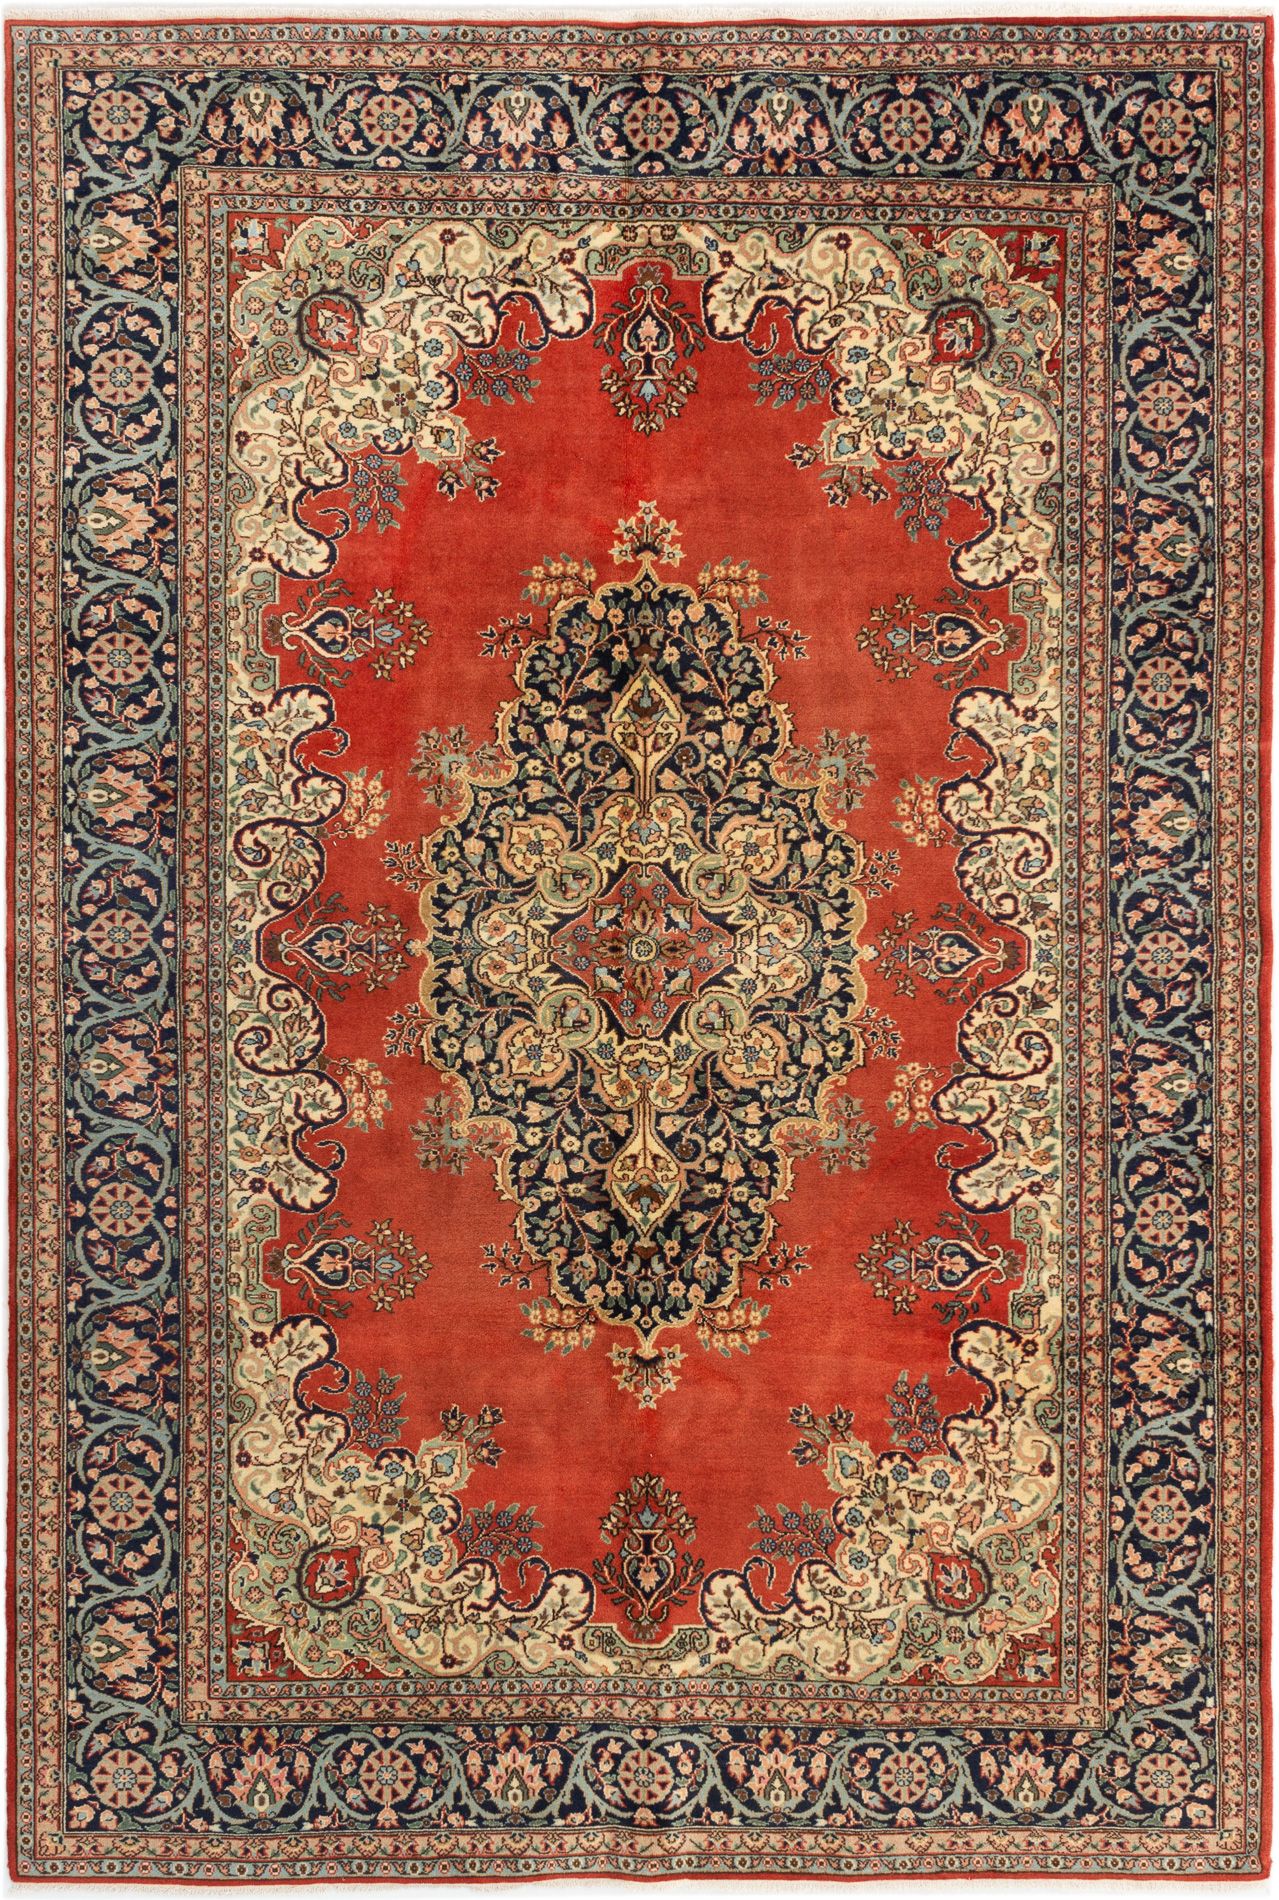 Hand-knotted Anatolian Dark Copper Wool Rug 7'3" x 10'6" Size: 7'3" x 10'6"  